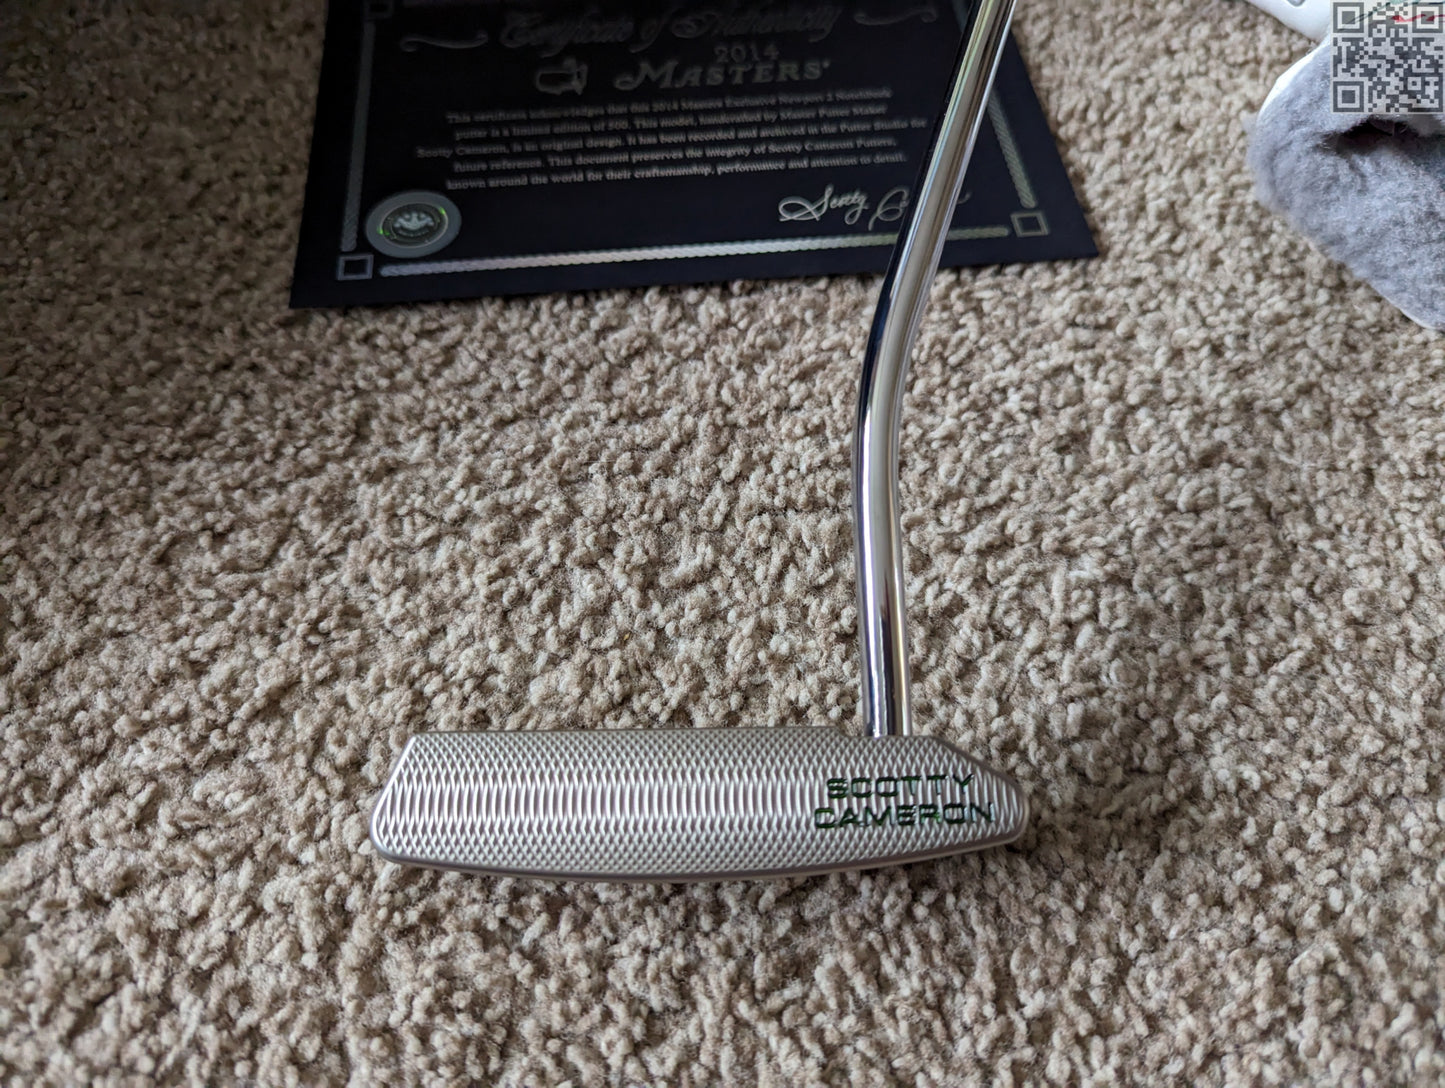 2014 Scotty Cameron Masters Tournament Limited Edition Putter 500